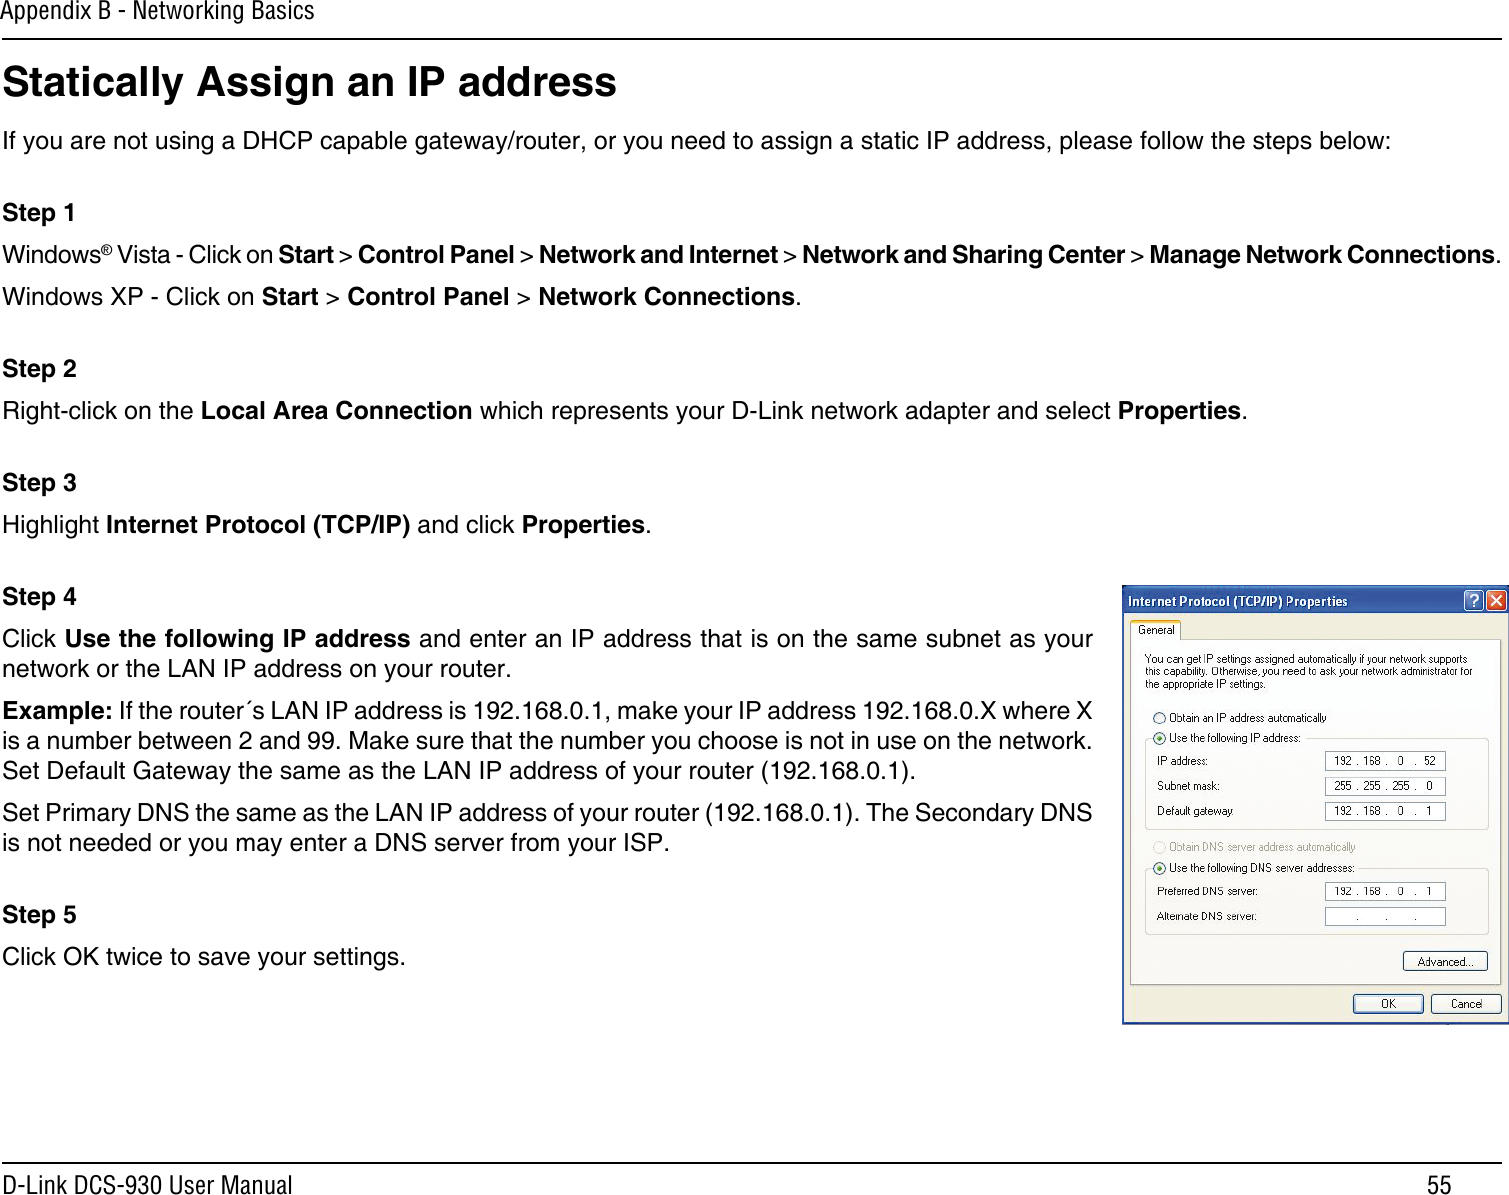 55D-Link DCS-930 User ManualAppendix B - Networking BasicsStatically Assign an IP addressIf you are not using a DHCP capable gateway/router, or you need to assign a static IP address, please follow the steps below: Step 1Windows® Vista - Click on Start &gt; Control Panel &gt; Network and Internet &gt; Network and Sharing Center &gt; Manage Network Connections. Windows XP - Click on Start &gt; Control Panel &gt; Network Connections. Step 2Right-click on the Local Area Connection which represents your D-Link network adapter and select Properties. Step 3Highlight Internet Protocol (TCP/IP) and click Properties. Step 4Click Use the following IP address and enter an IP address that is on the same subnet as your network or the LAN IP address on your router. Example: If the router´s LAN IP address is 192.168.0.1, make your IP address 192.168.0.X where X is a number between 2 and 99. Make sure that the number you choose is not in use on the network. Set Default Gateway the same as the LAN IP address of your router (192.168.0.1). Set Primary DNS the same as the LAN IP address of your router (192.168.0.1). The Secondary DNS is not needed or you may enter a DNS server from your ISP. Step 5Click OK twice to save your settings.